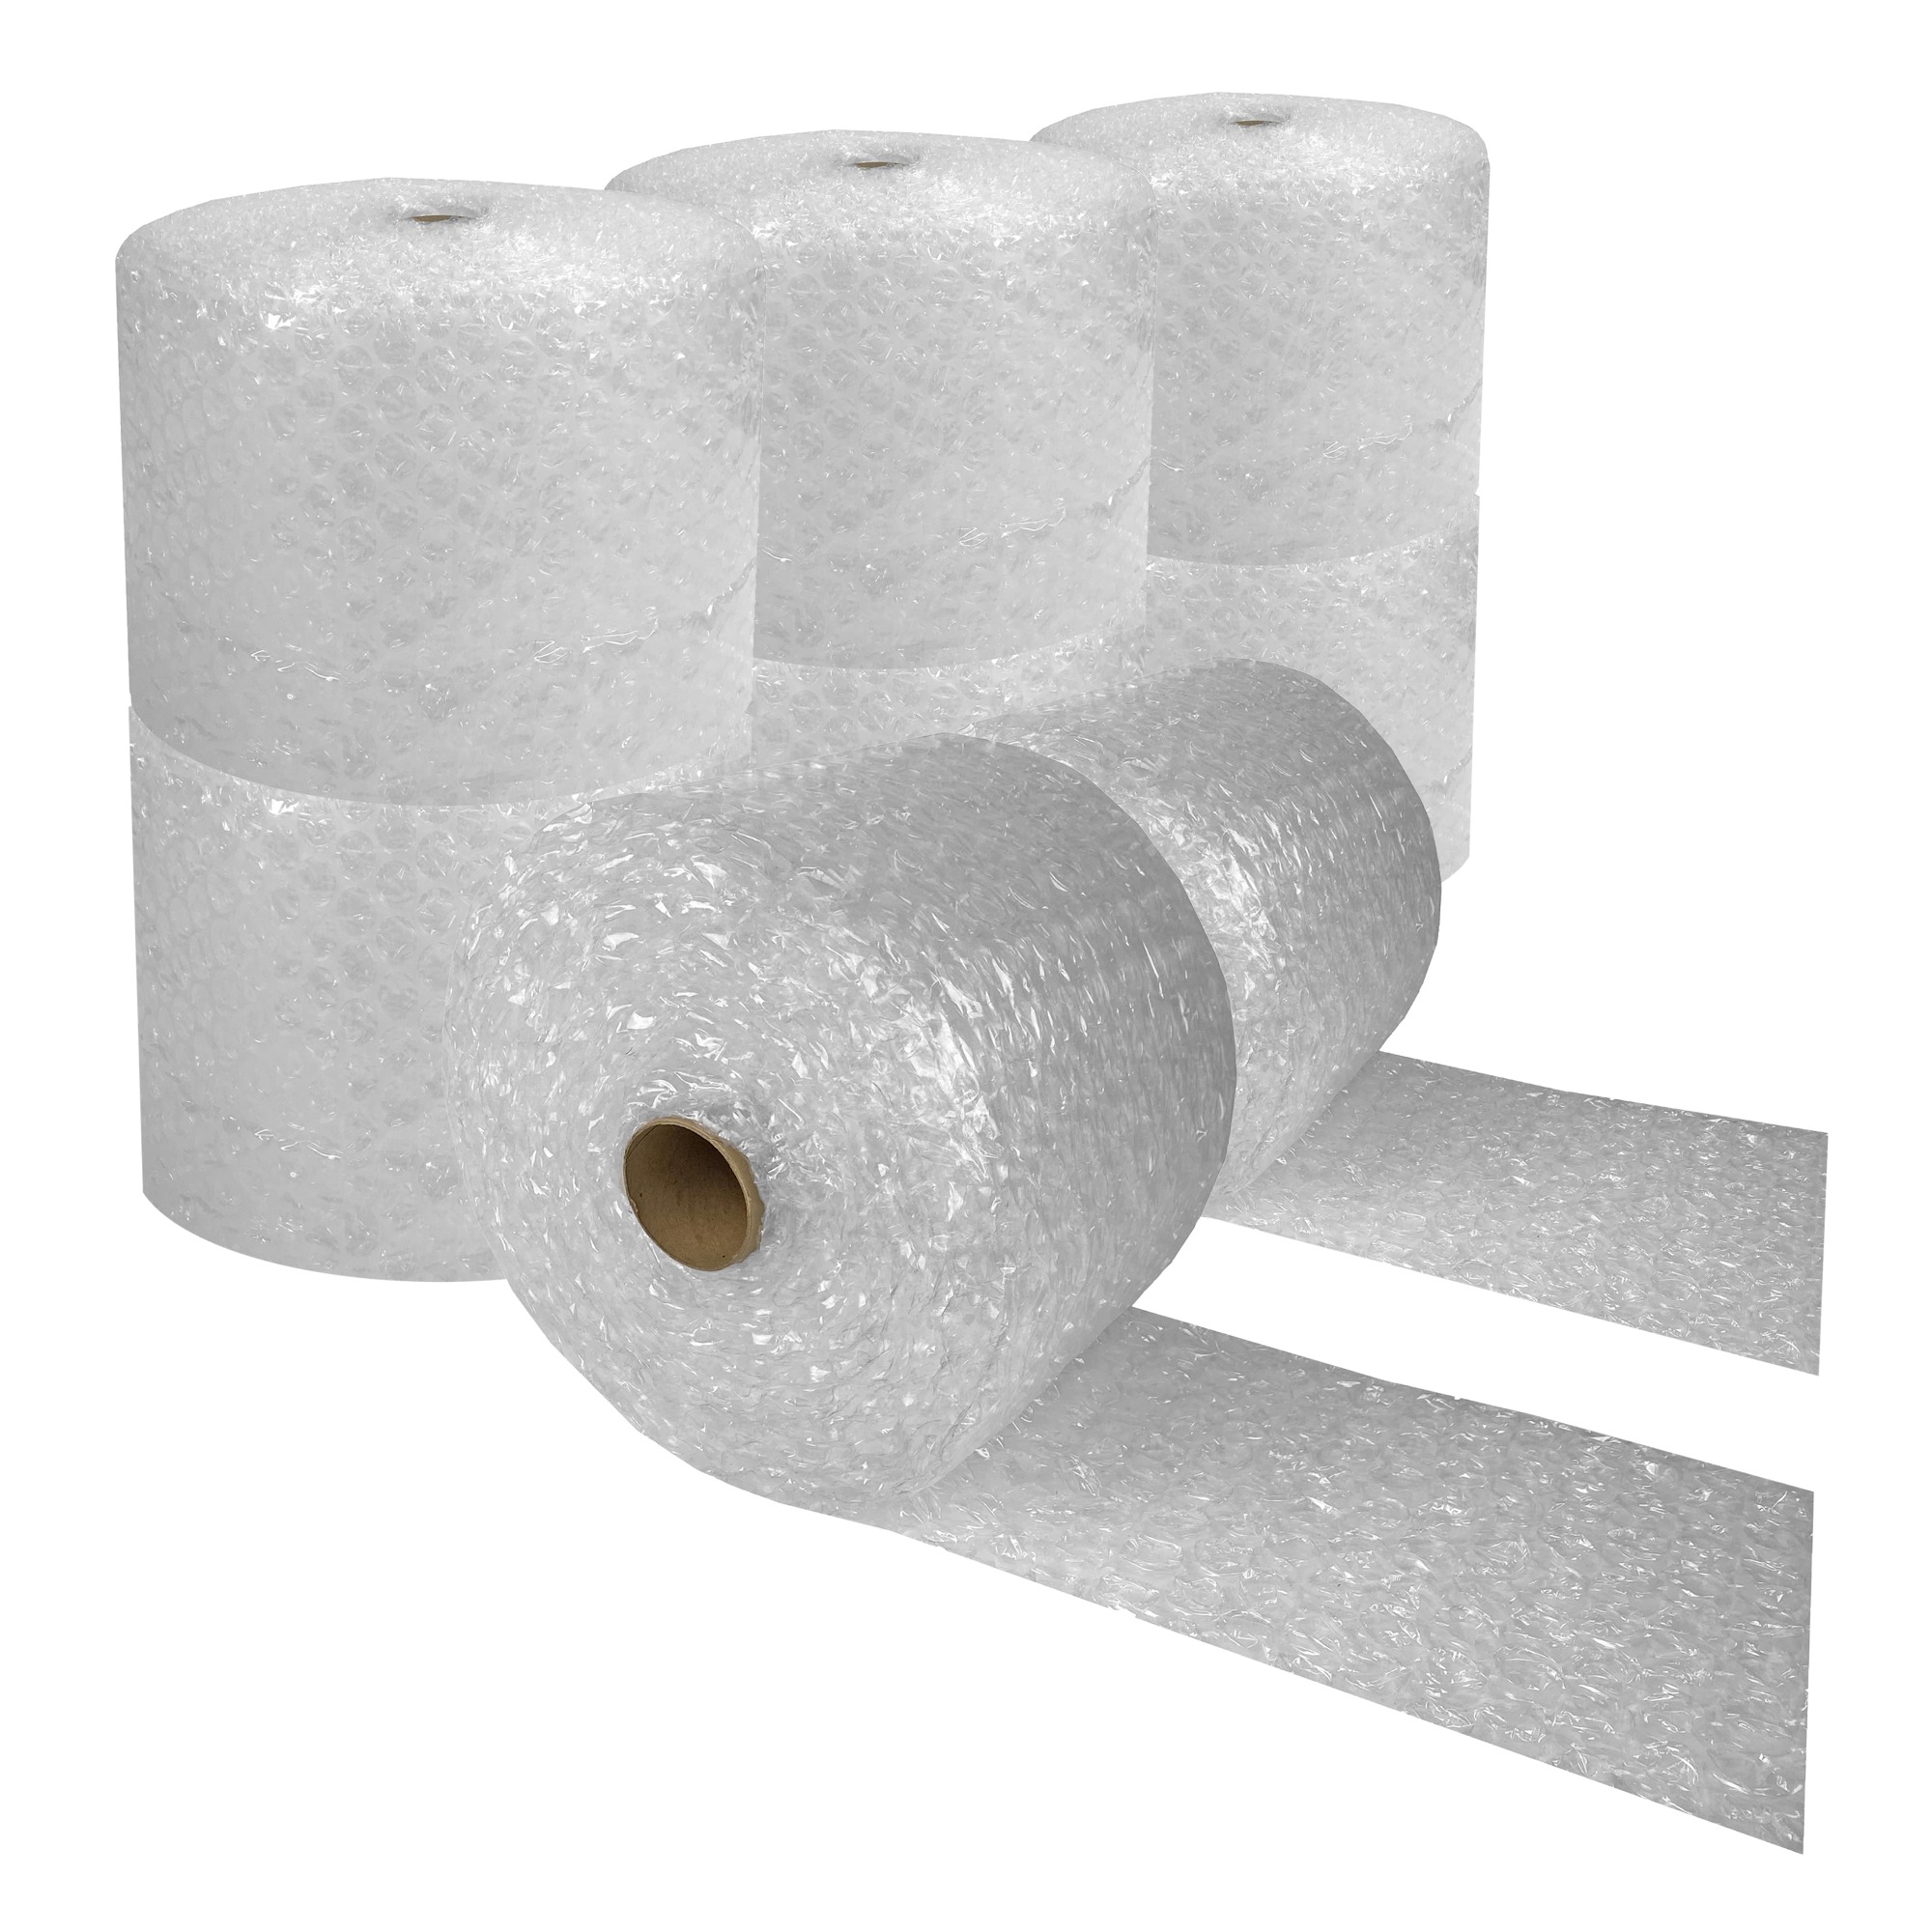 Uoffice Bubble Cushioning Roll - 520 ft x 12 Wide Large 1/2 Bubbles